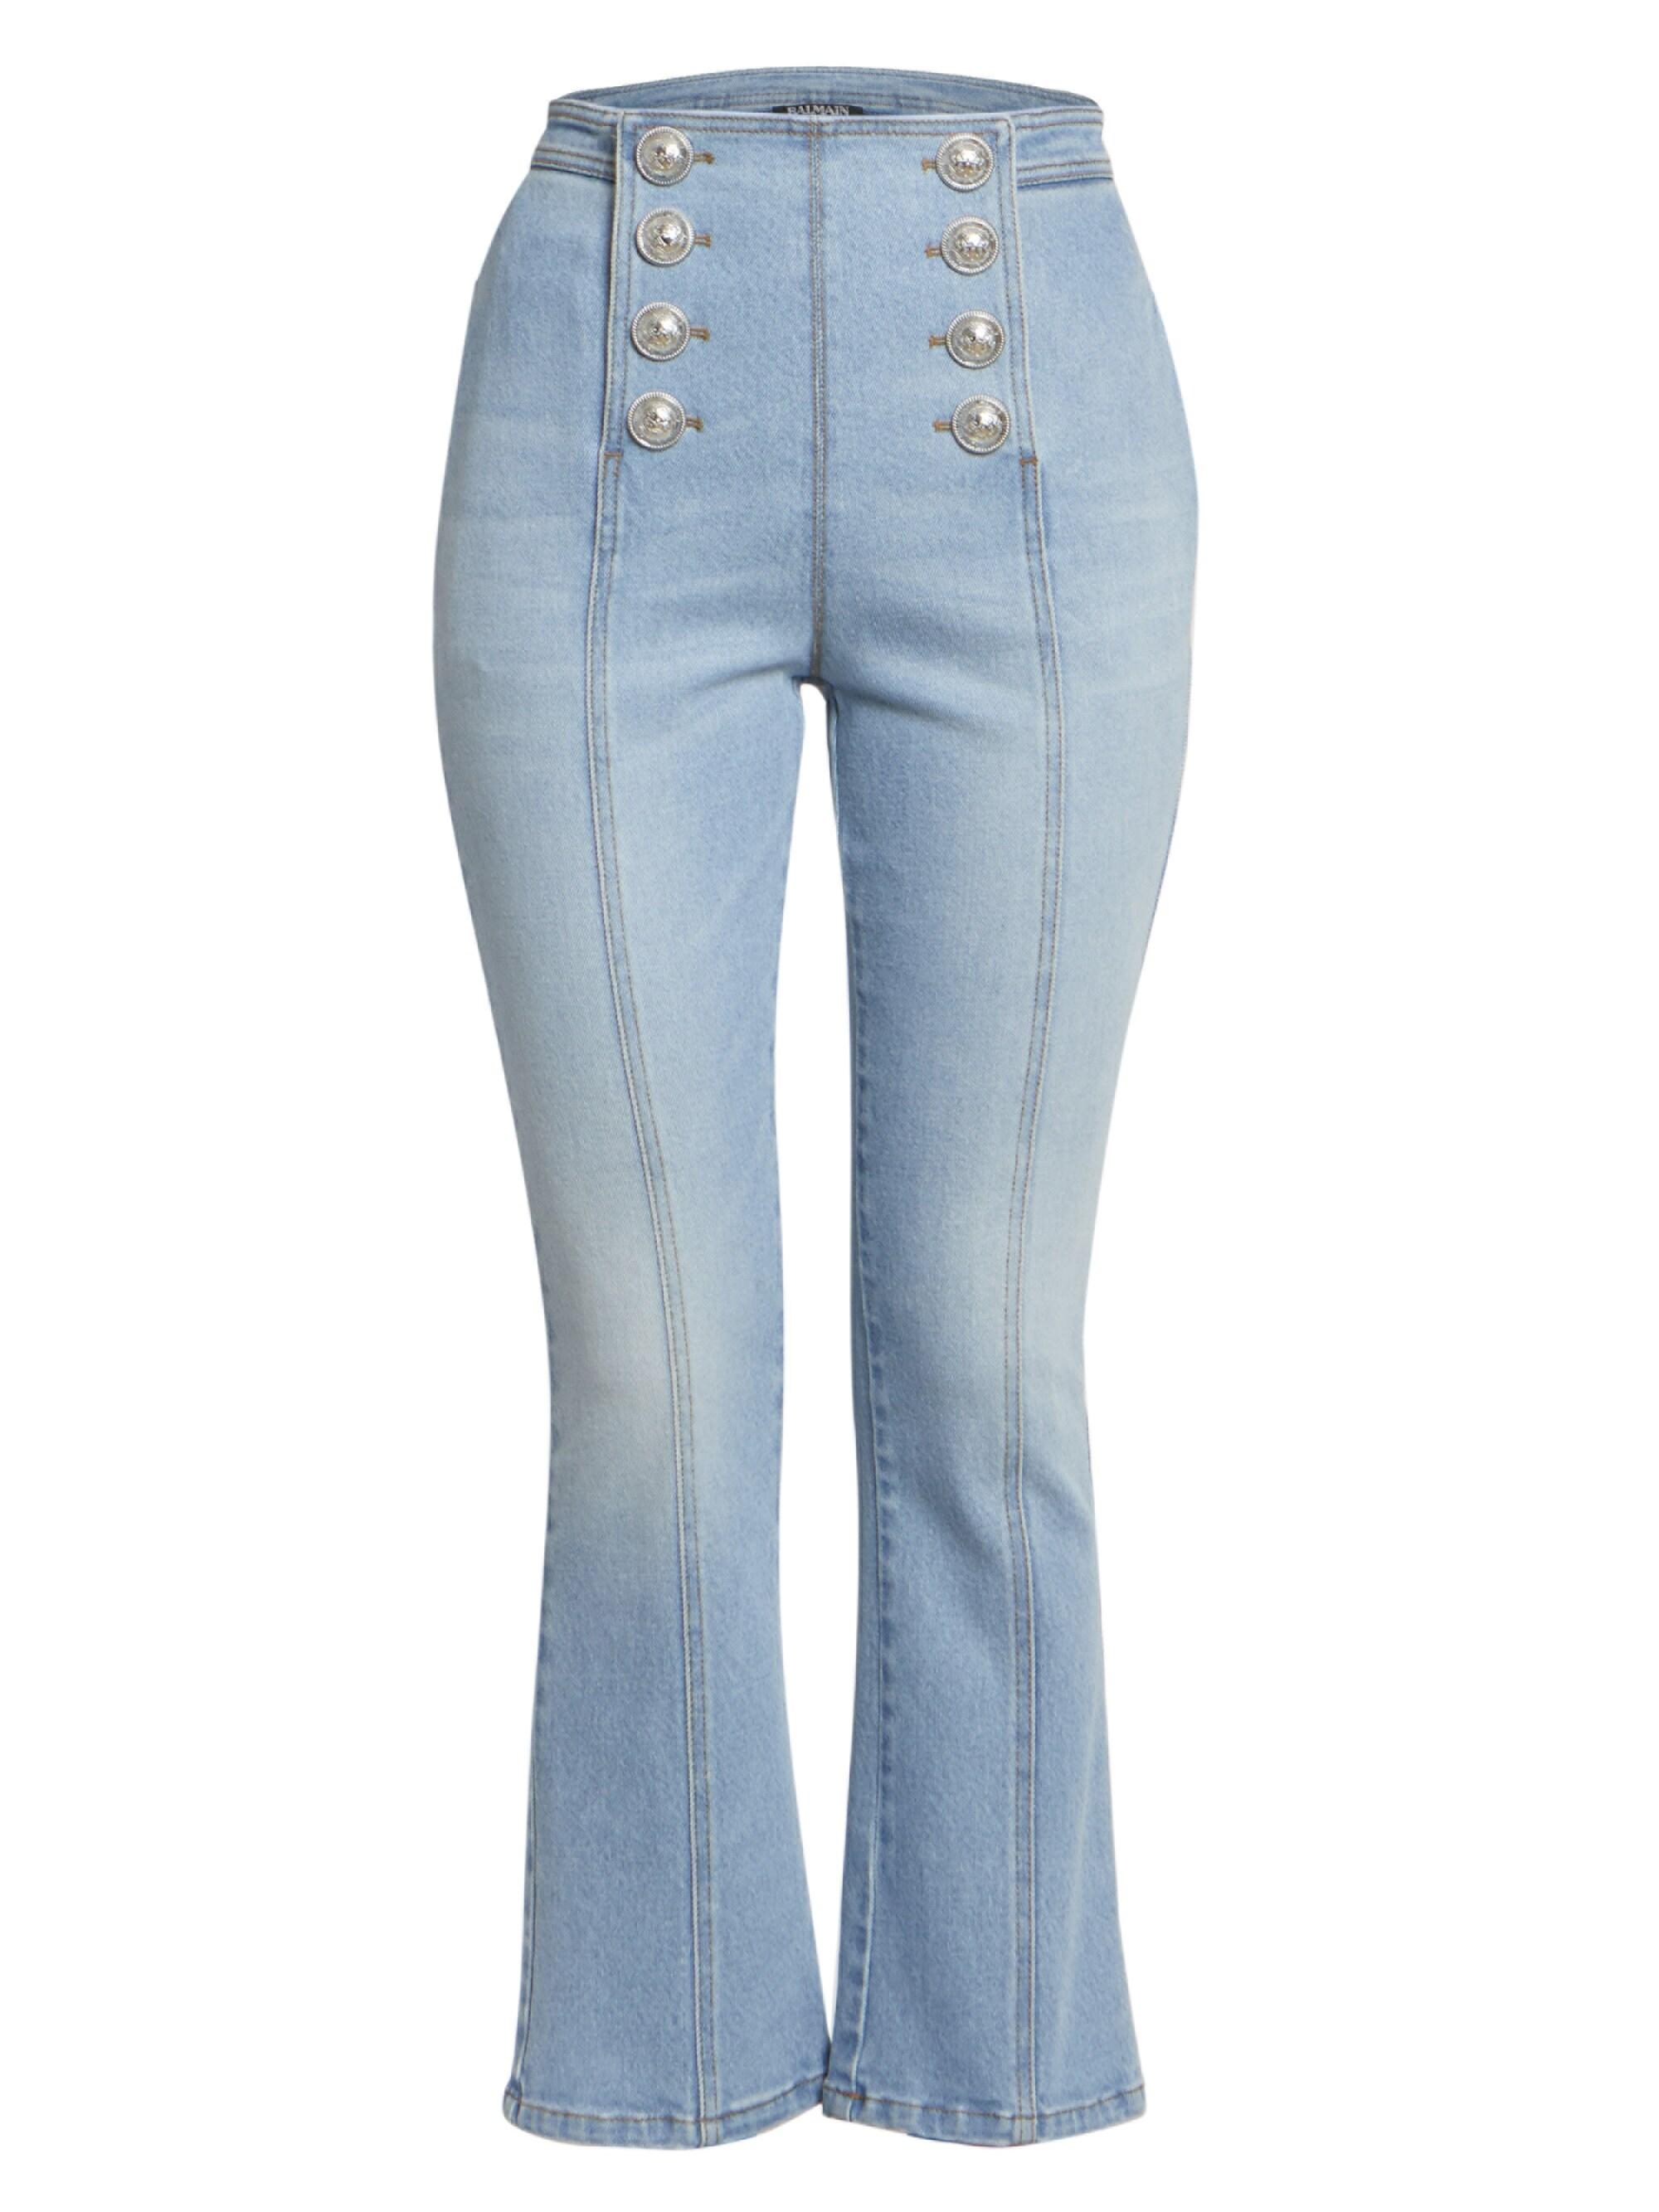 Balmain Women's Cropped Button-front Flared Jeans - Blue Jean in Blue ...